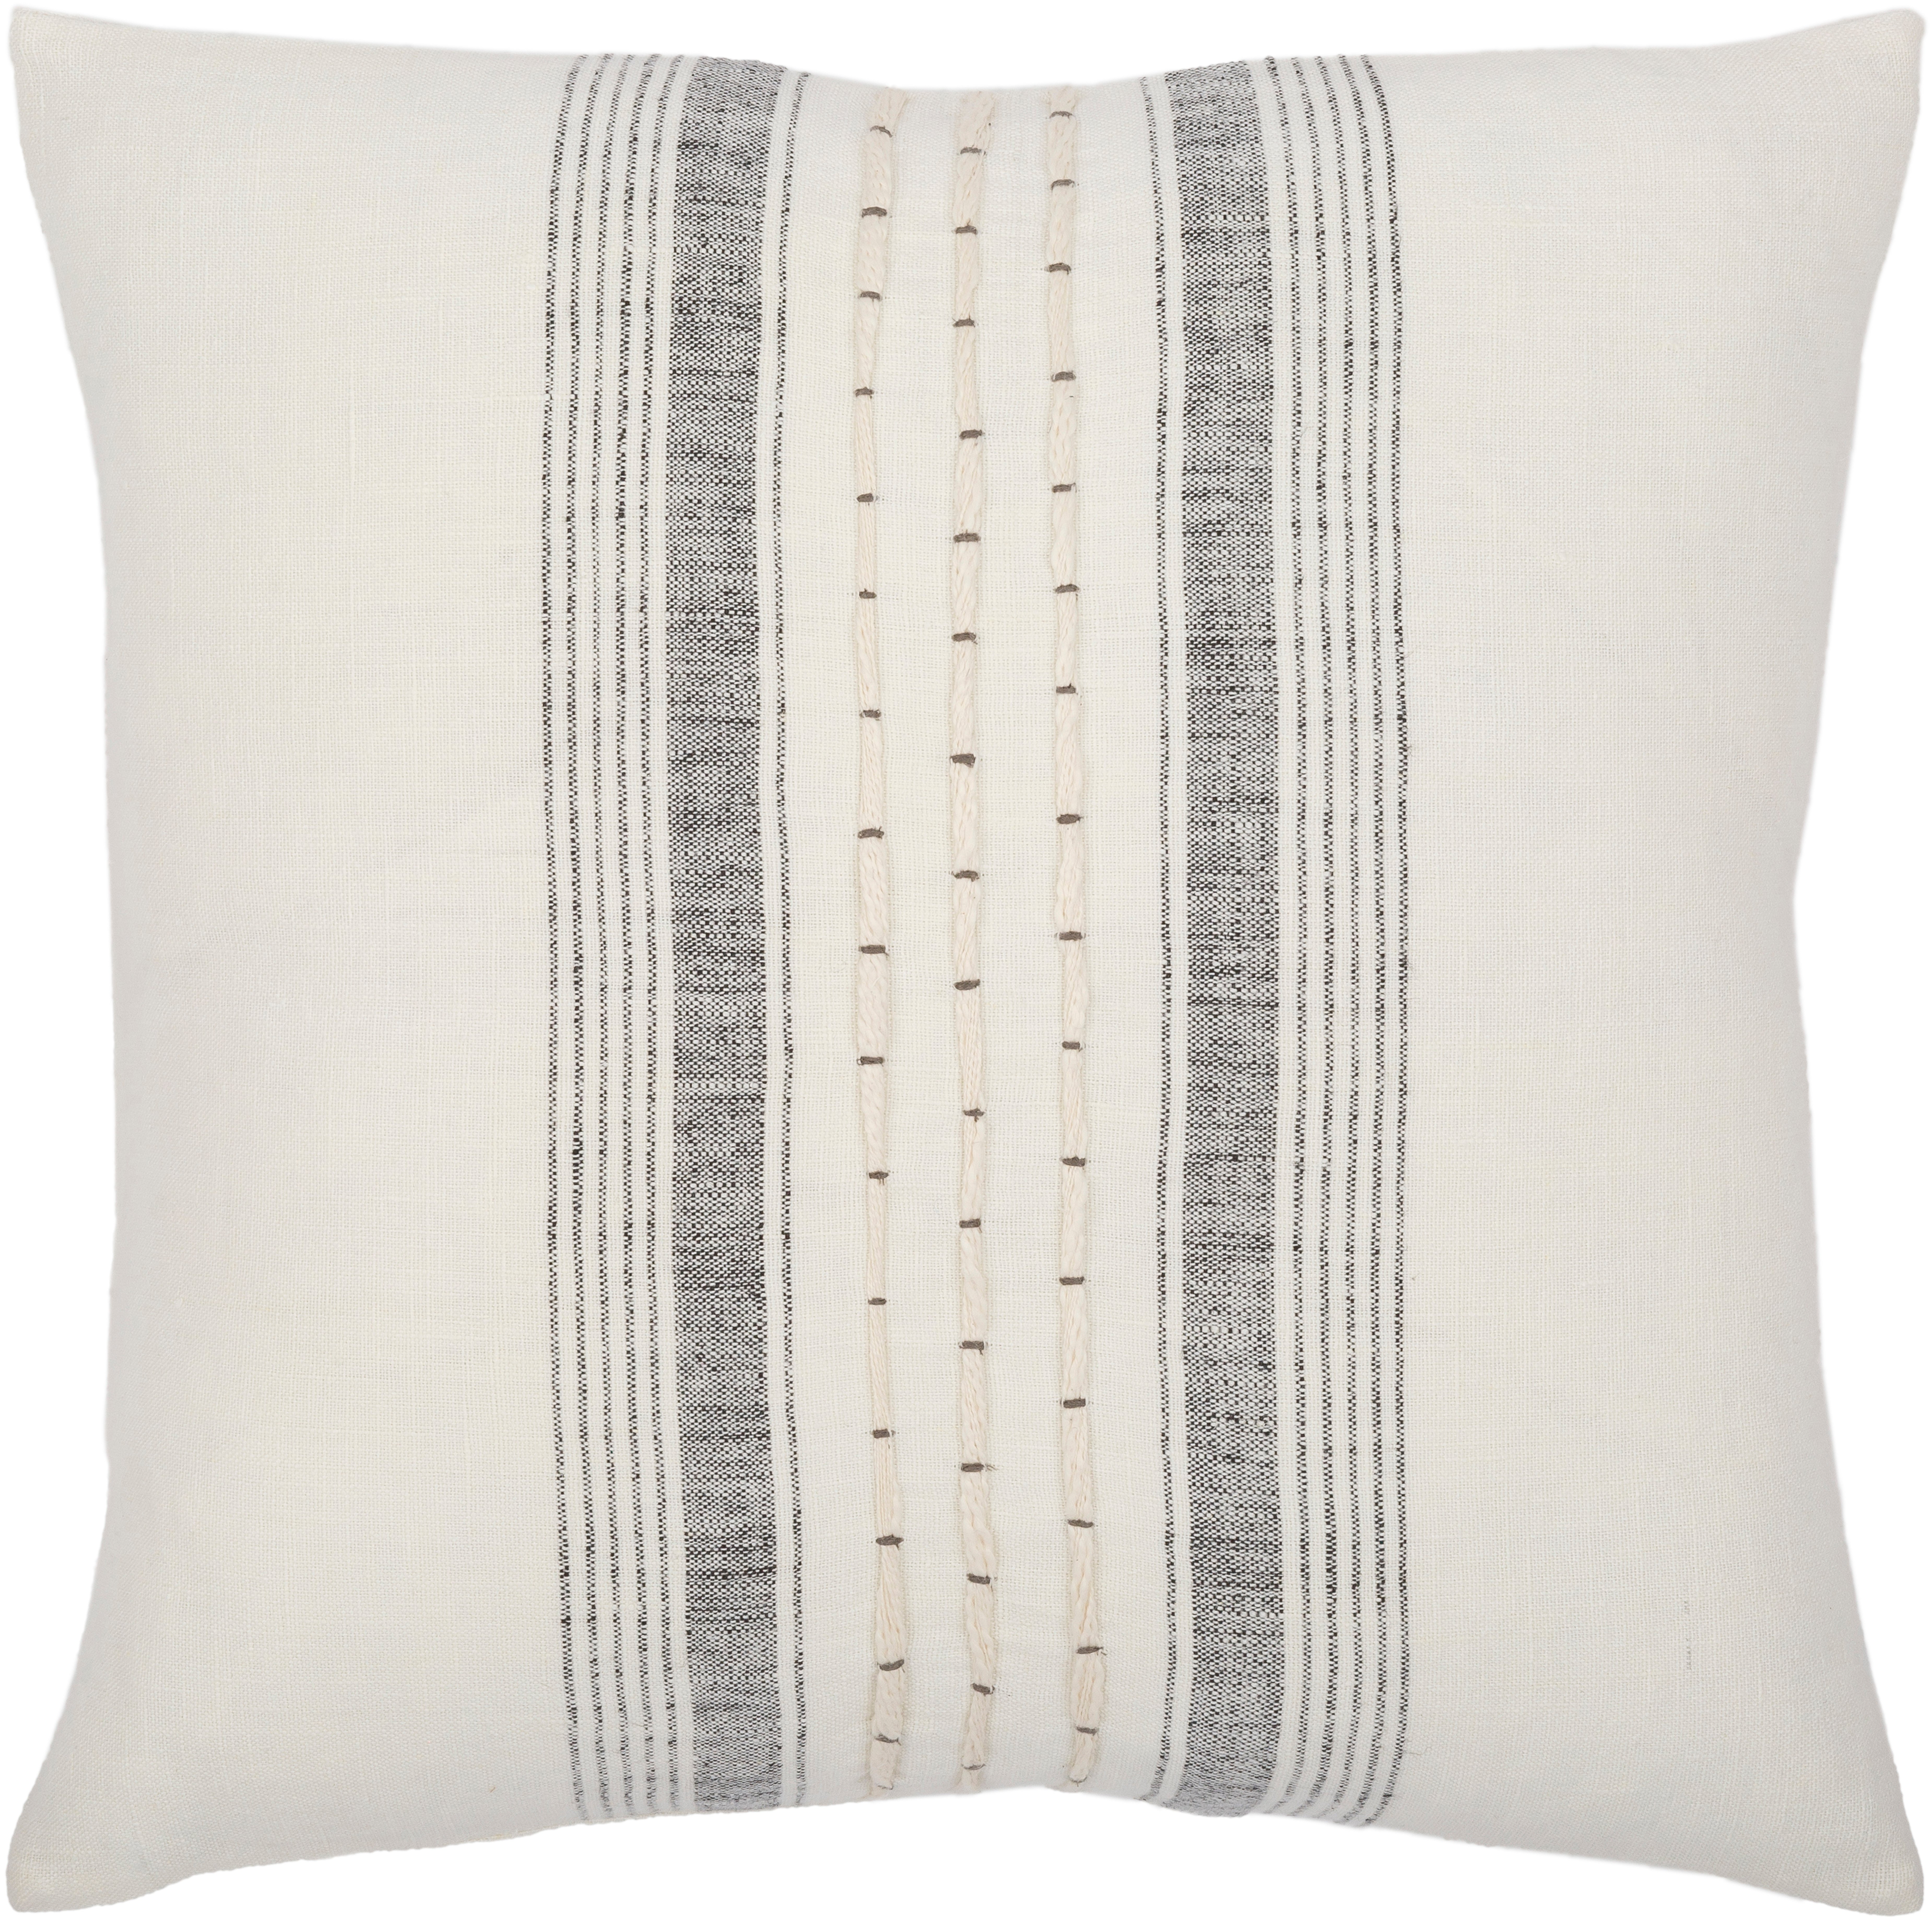 Linen Stripe Embellished Throw Pillow, 18" x 18", with poly insert - Surya